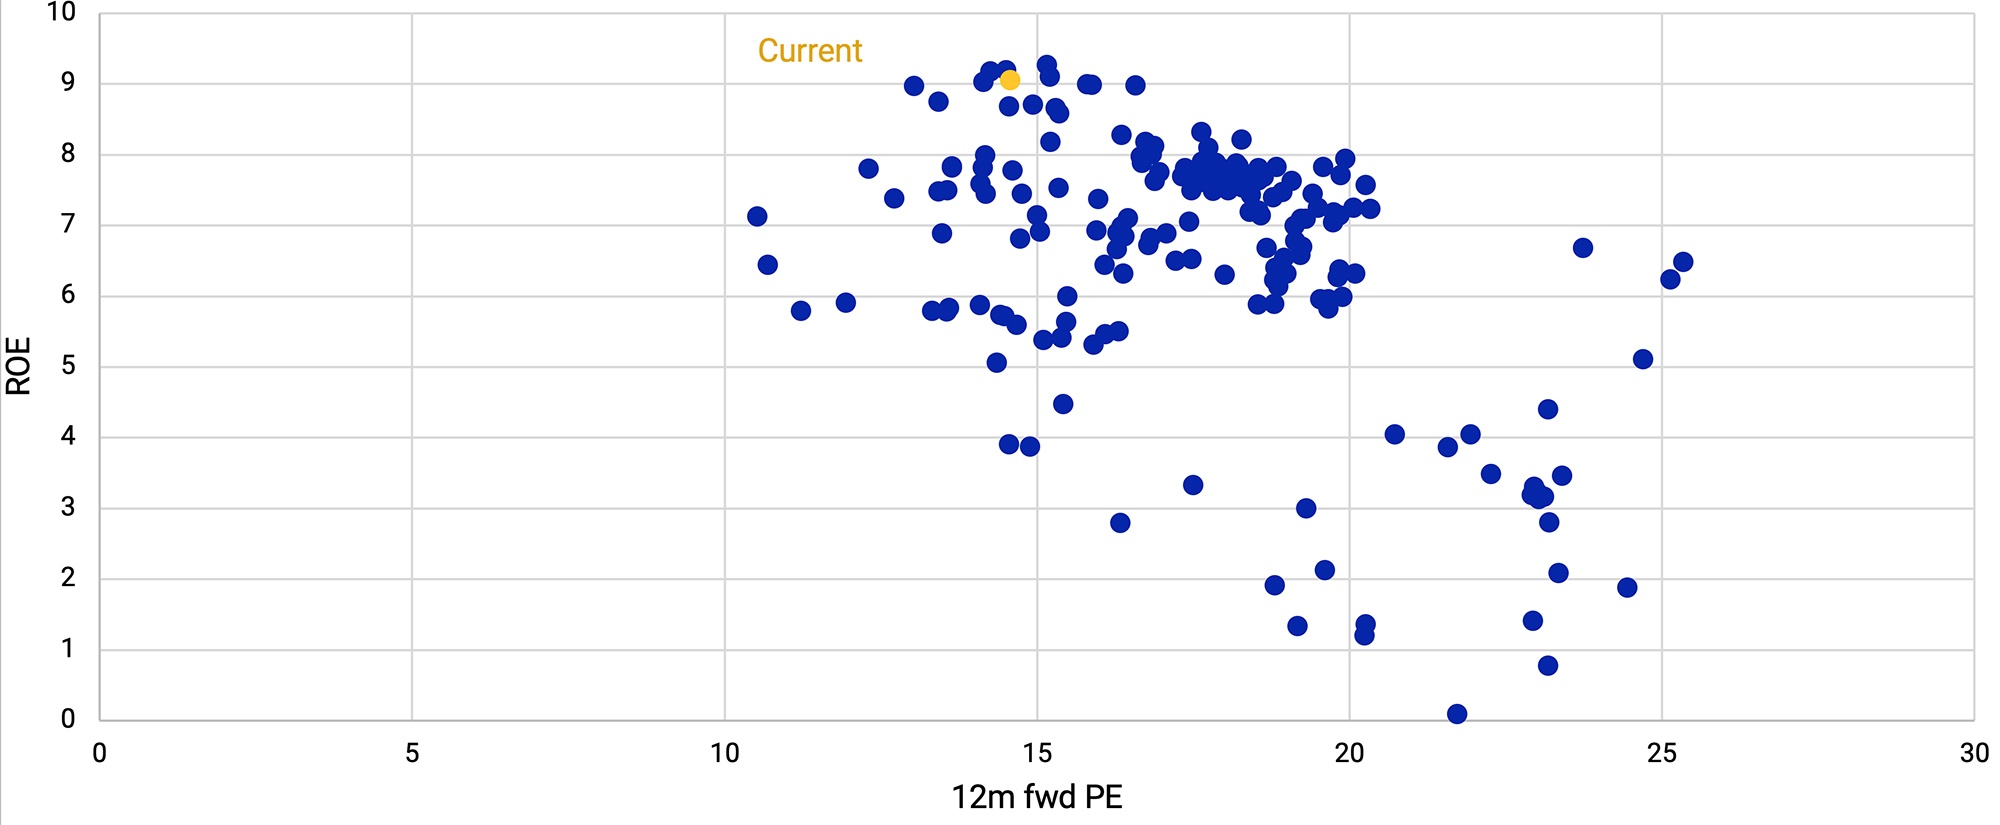 This exhibit is a dot plot that shows the 12-month forward price-to-earnings ratio and return on equity of the MSCI World Small Cap Index each month from June 2008 through May 2023